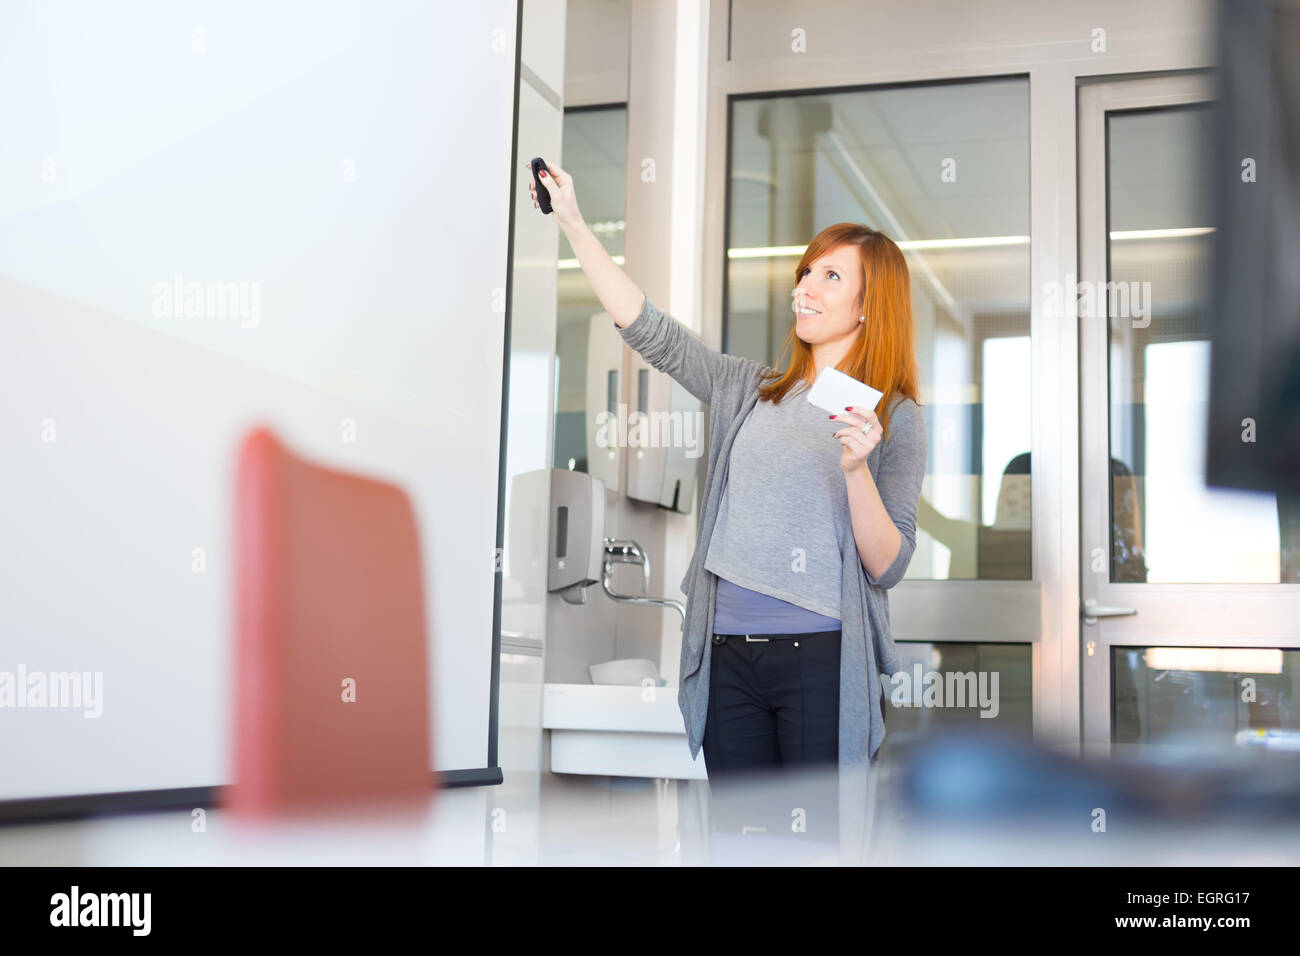 Businesswoman giving a talk. Stock Photo